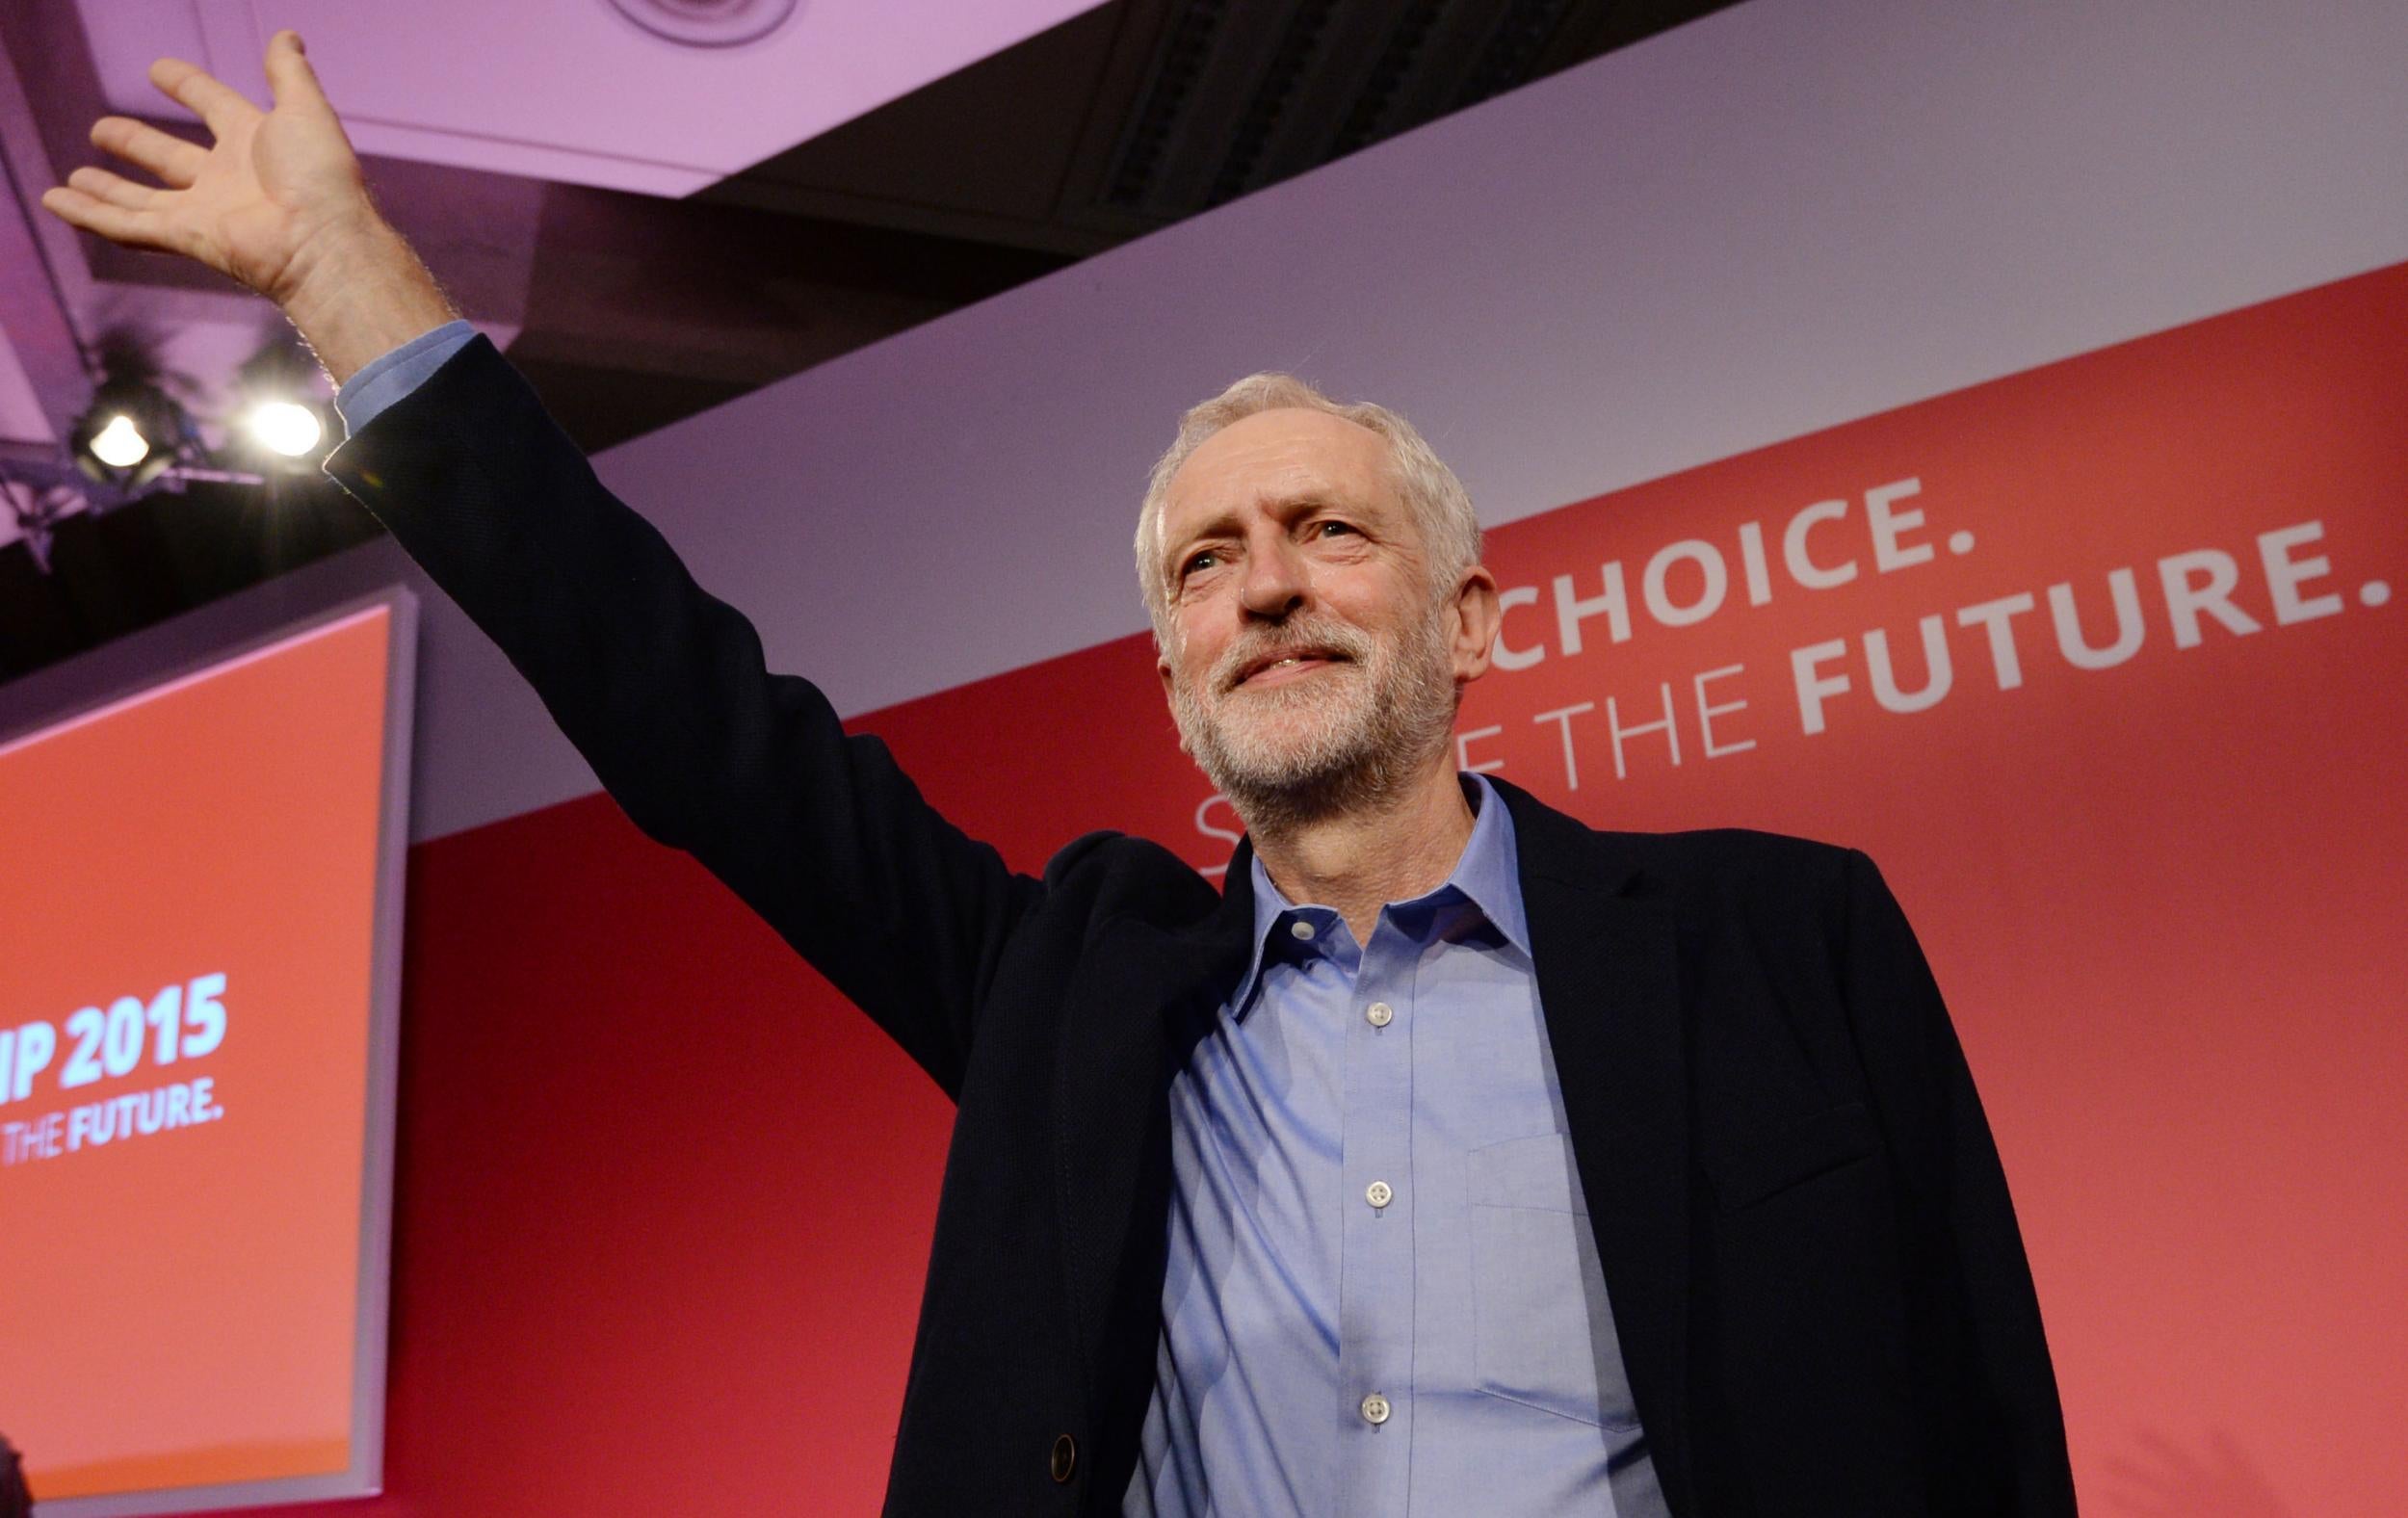 Jeremy Corbyn won 59.5 per cent of first preference voters in the Labour leadership contest